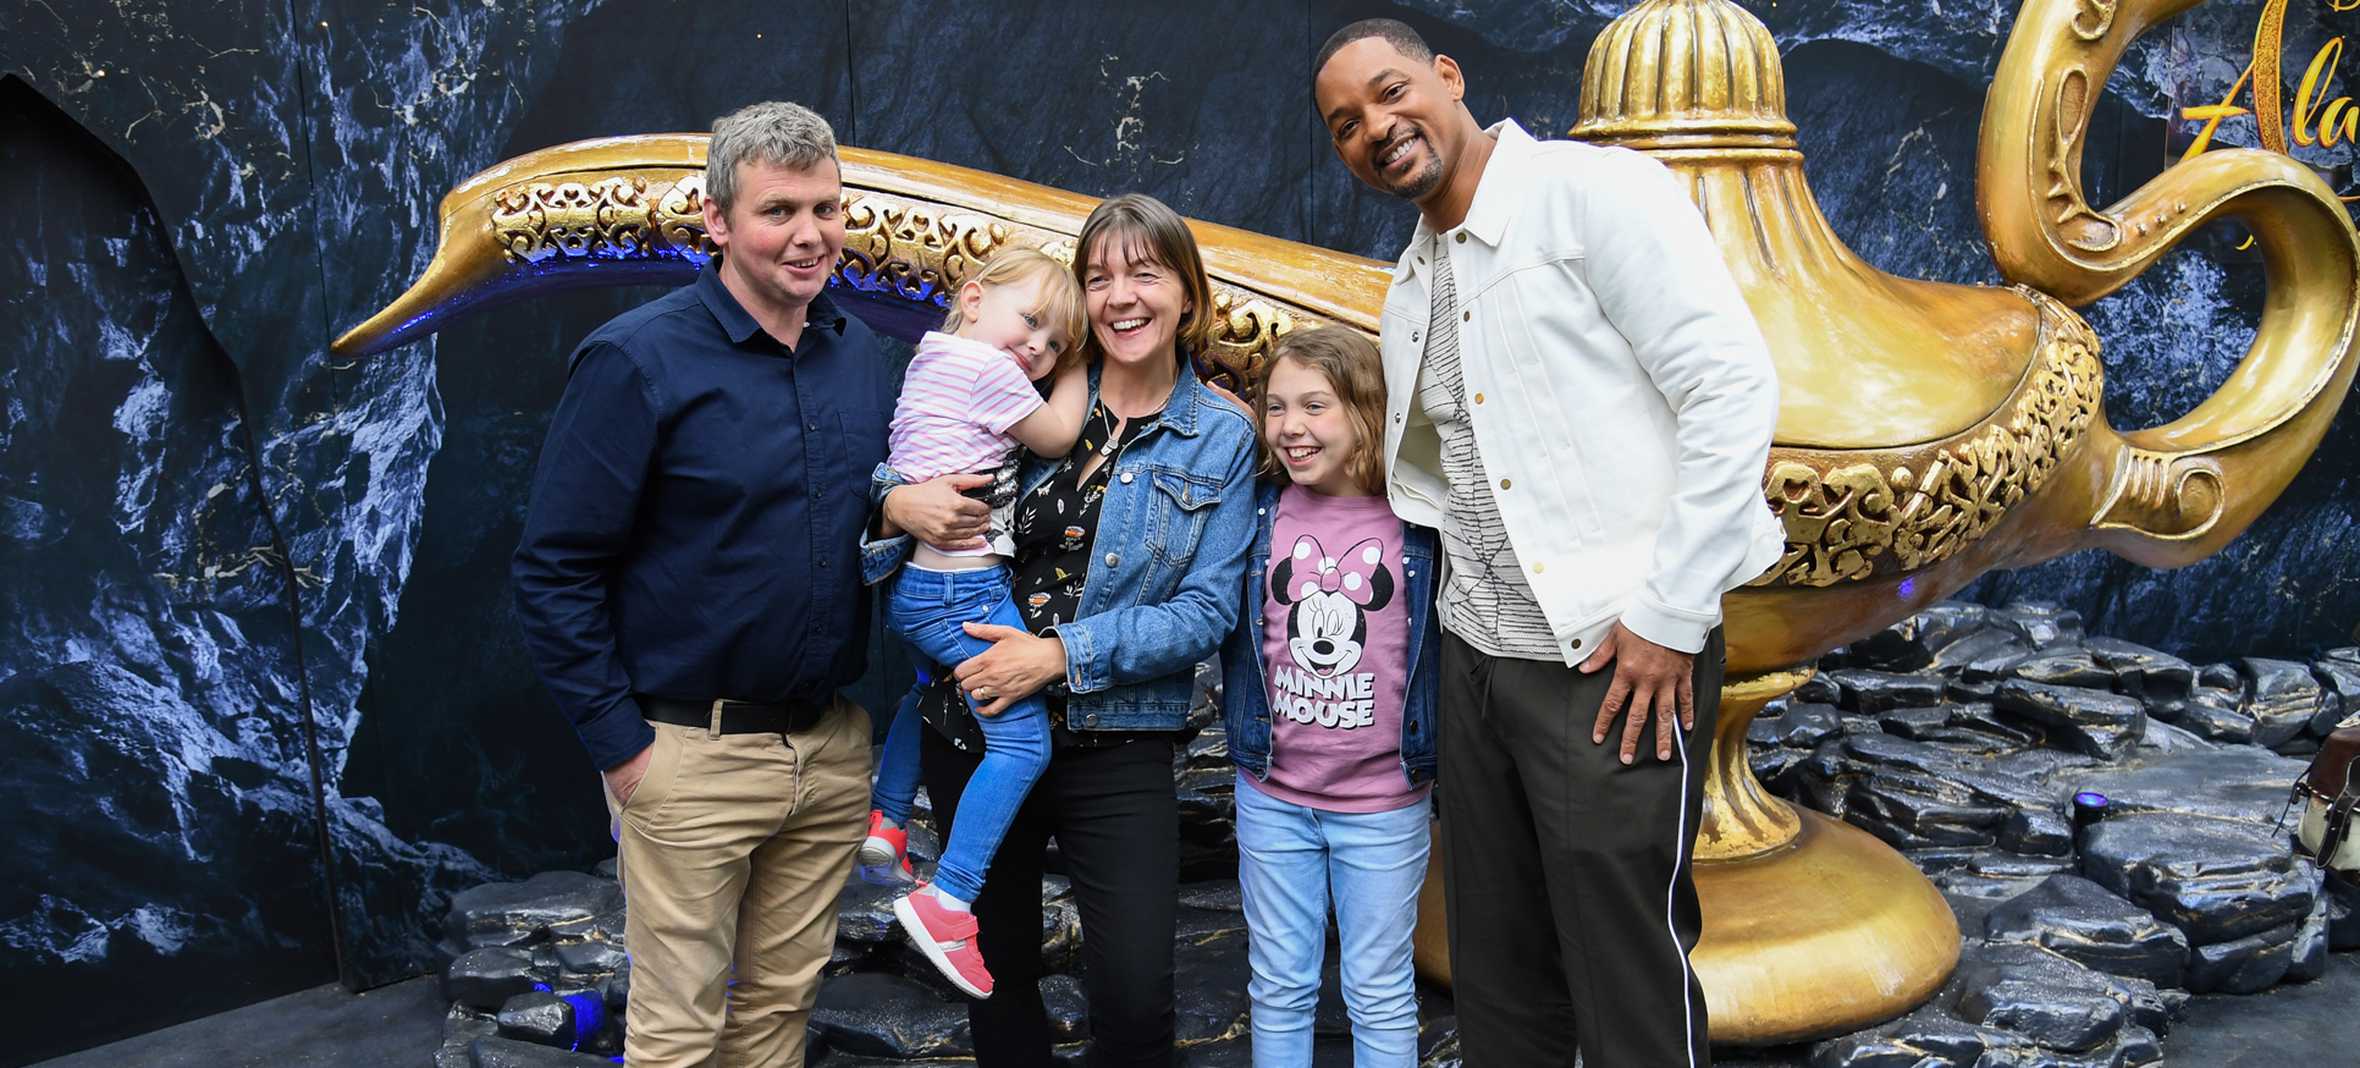 Emily and her family with Will Smith next to Aladdin's lamp